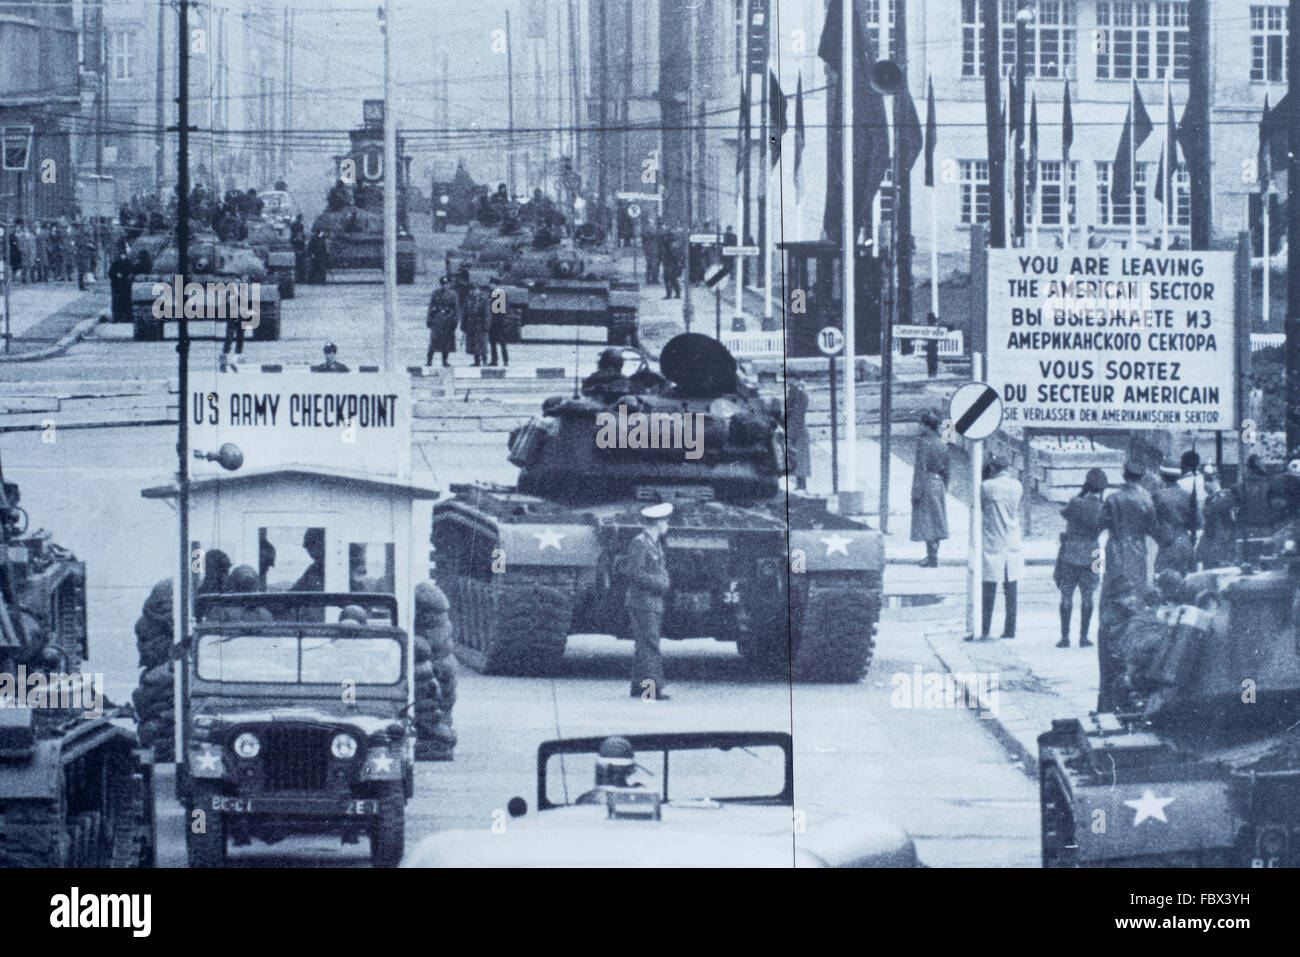 Historic image of Checkpoint Charlie which is part of a large outdoor display close to the famous landmark in Berlin, Germany Stock Photo